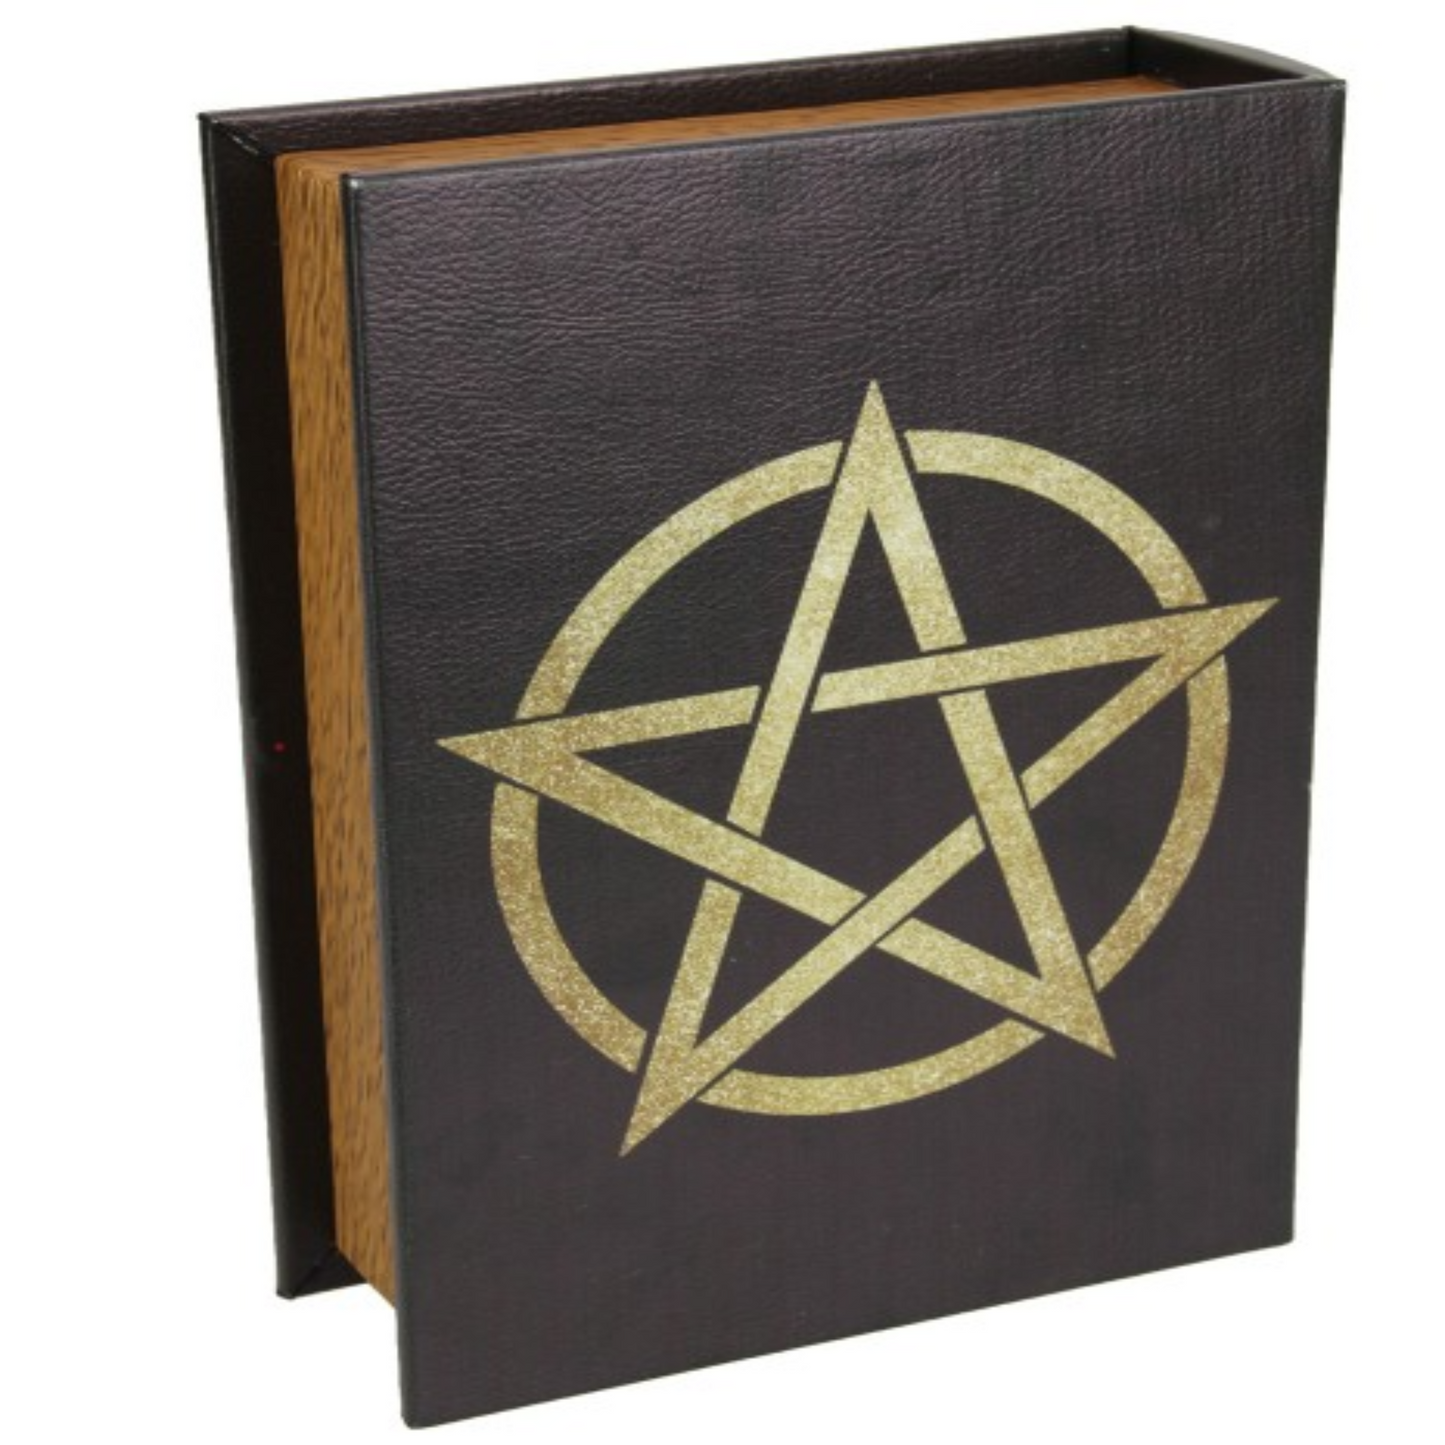 Pentacle Book Box with Black & Gold Design